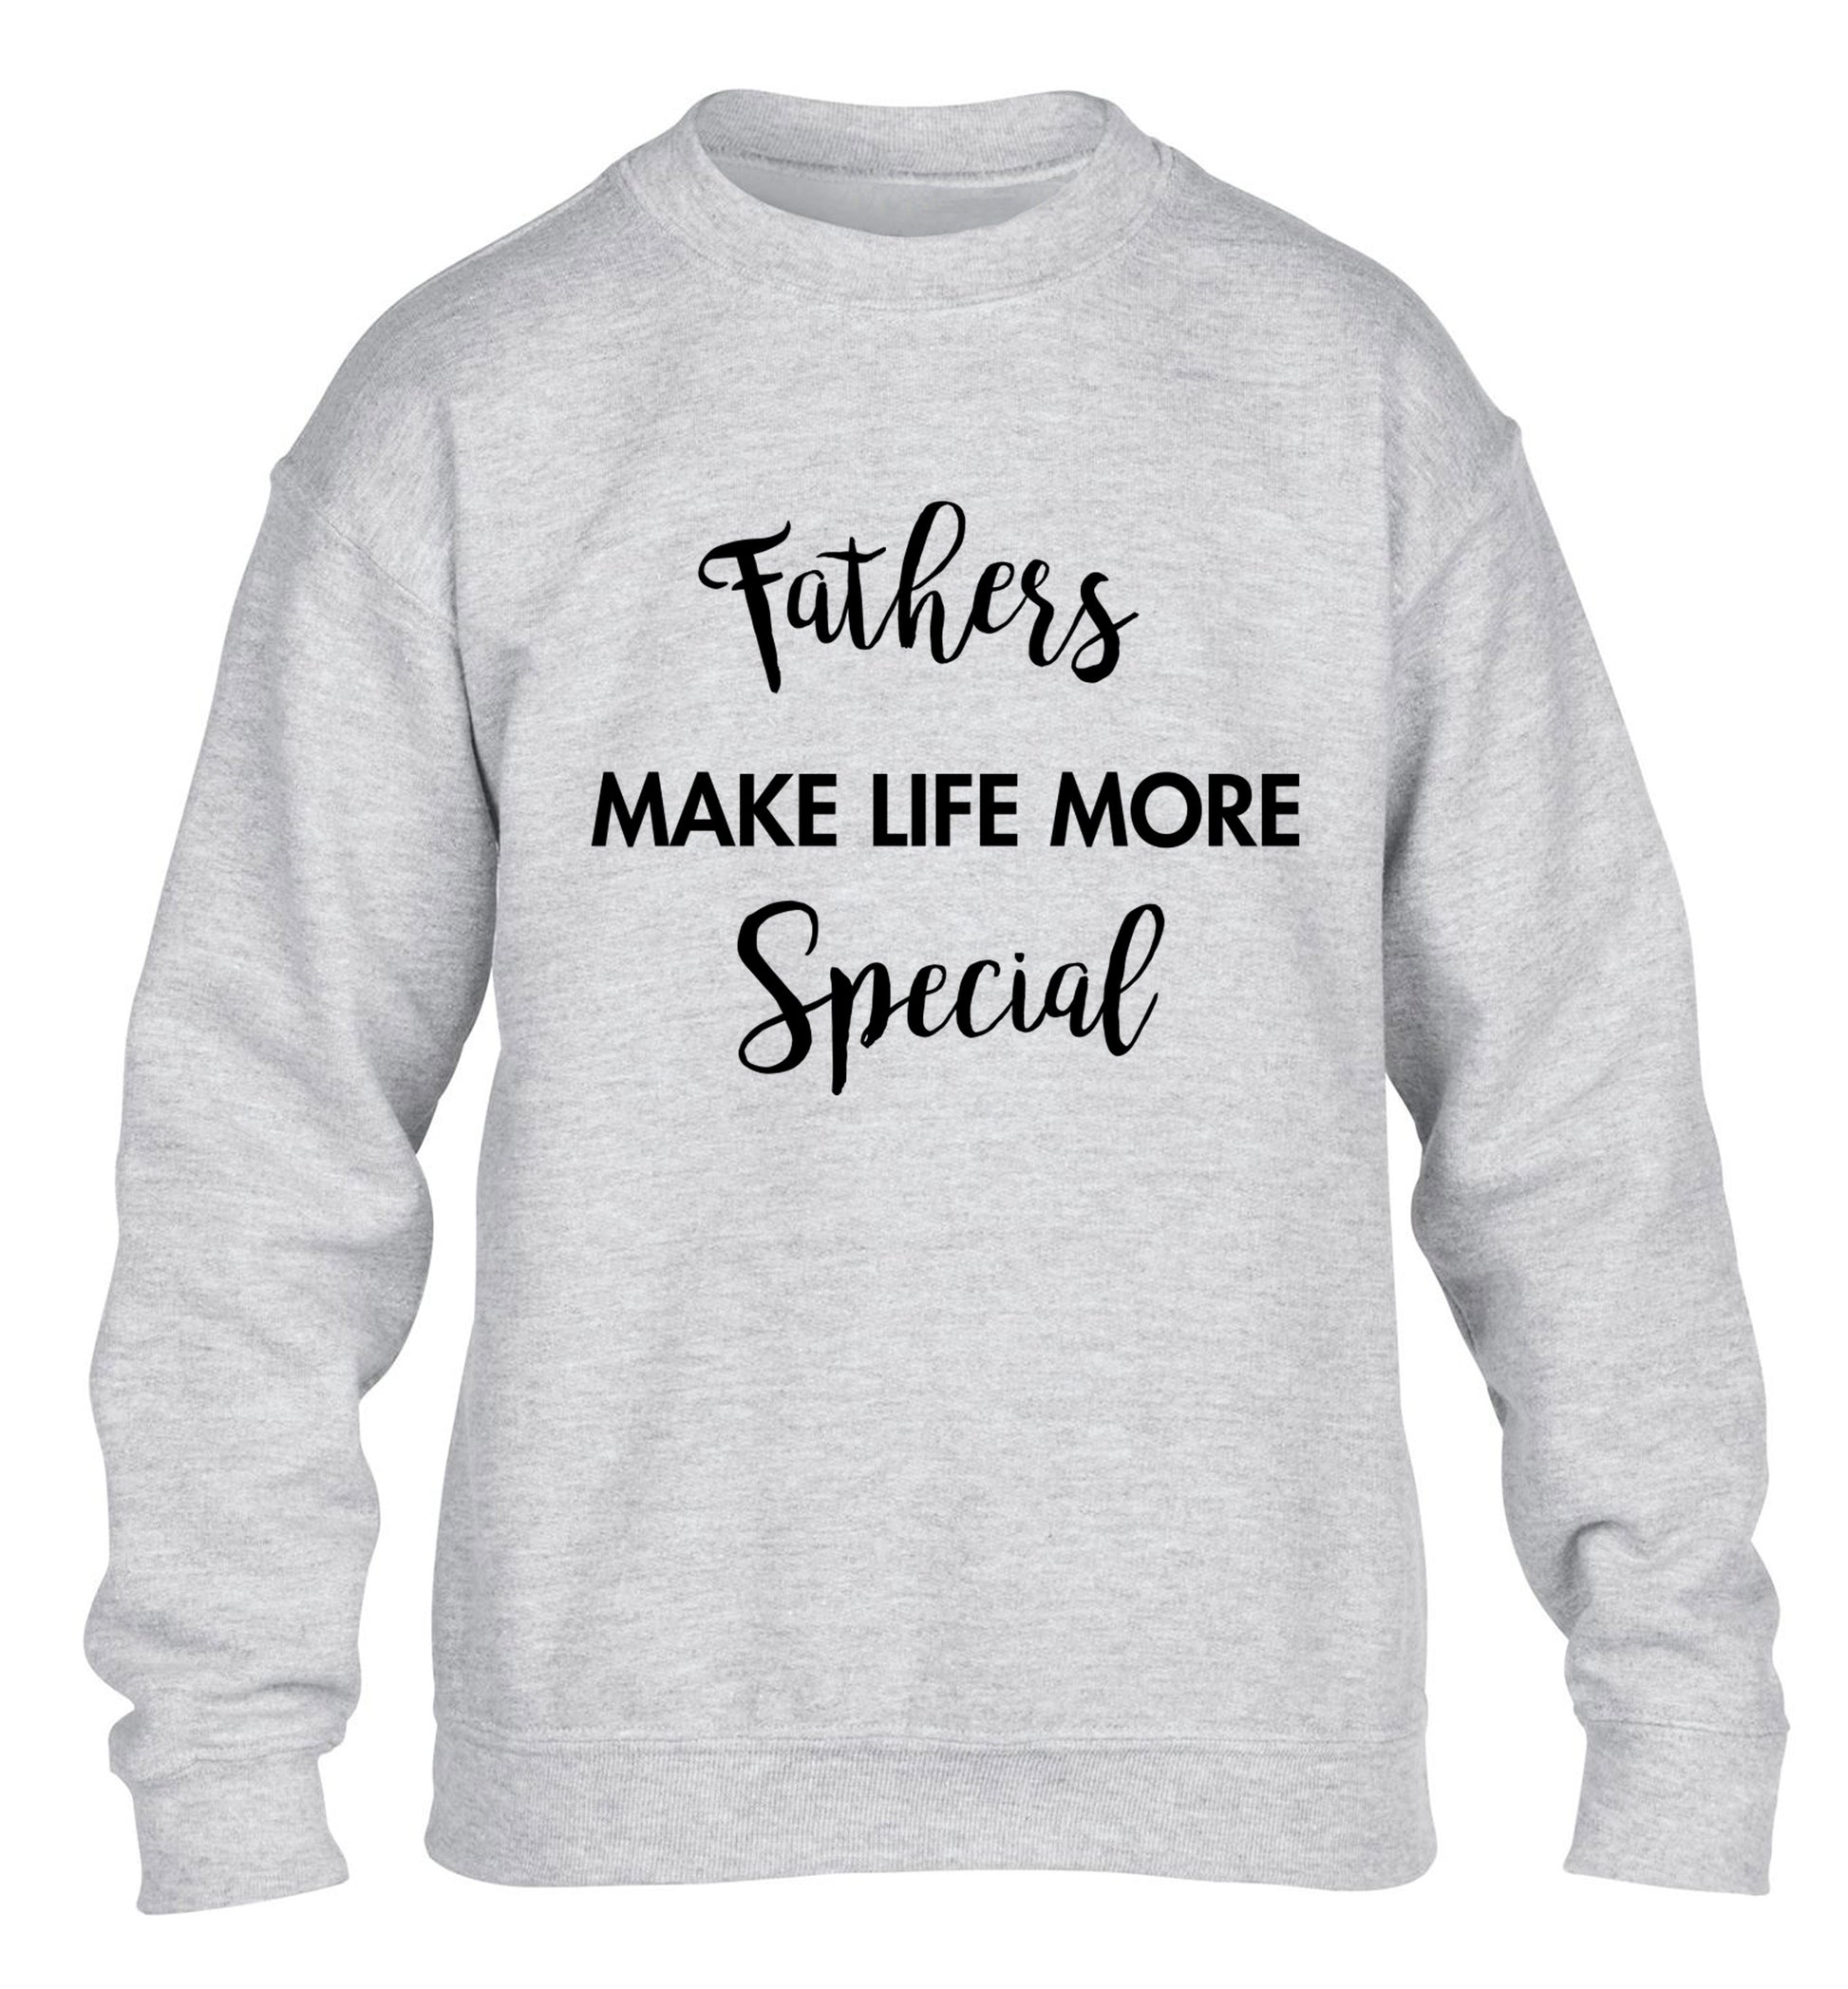 Fathers make life more special children's grey sweater 12-14 Years